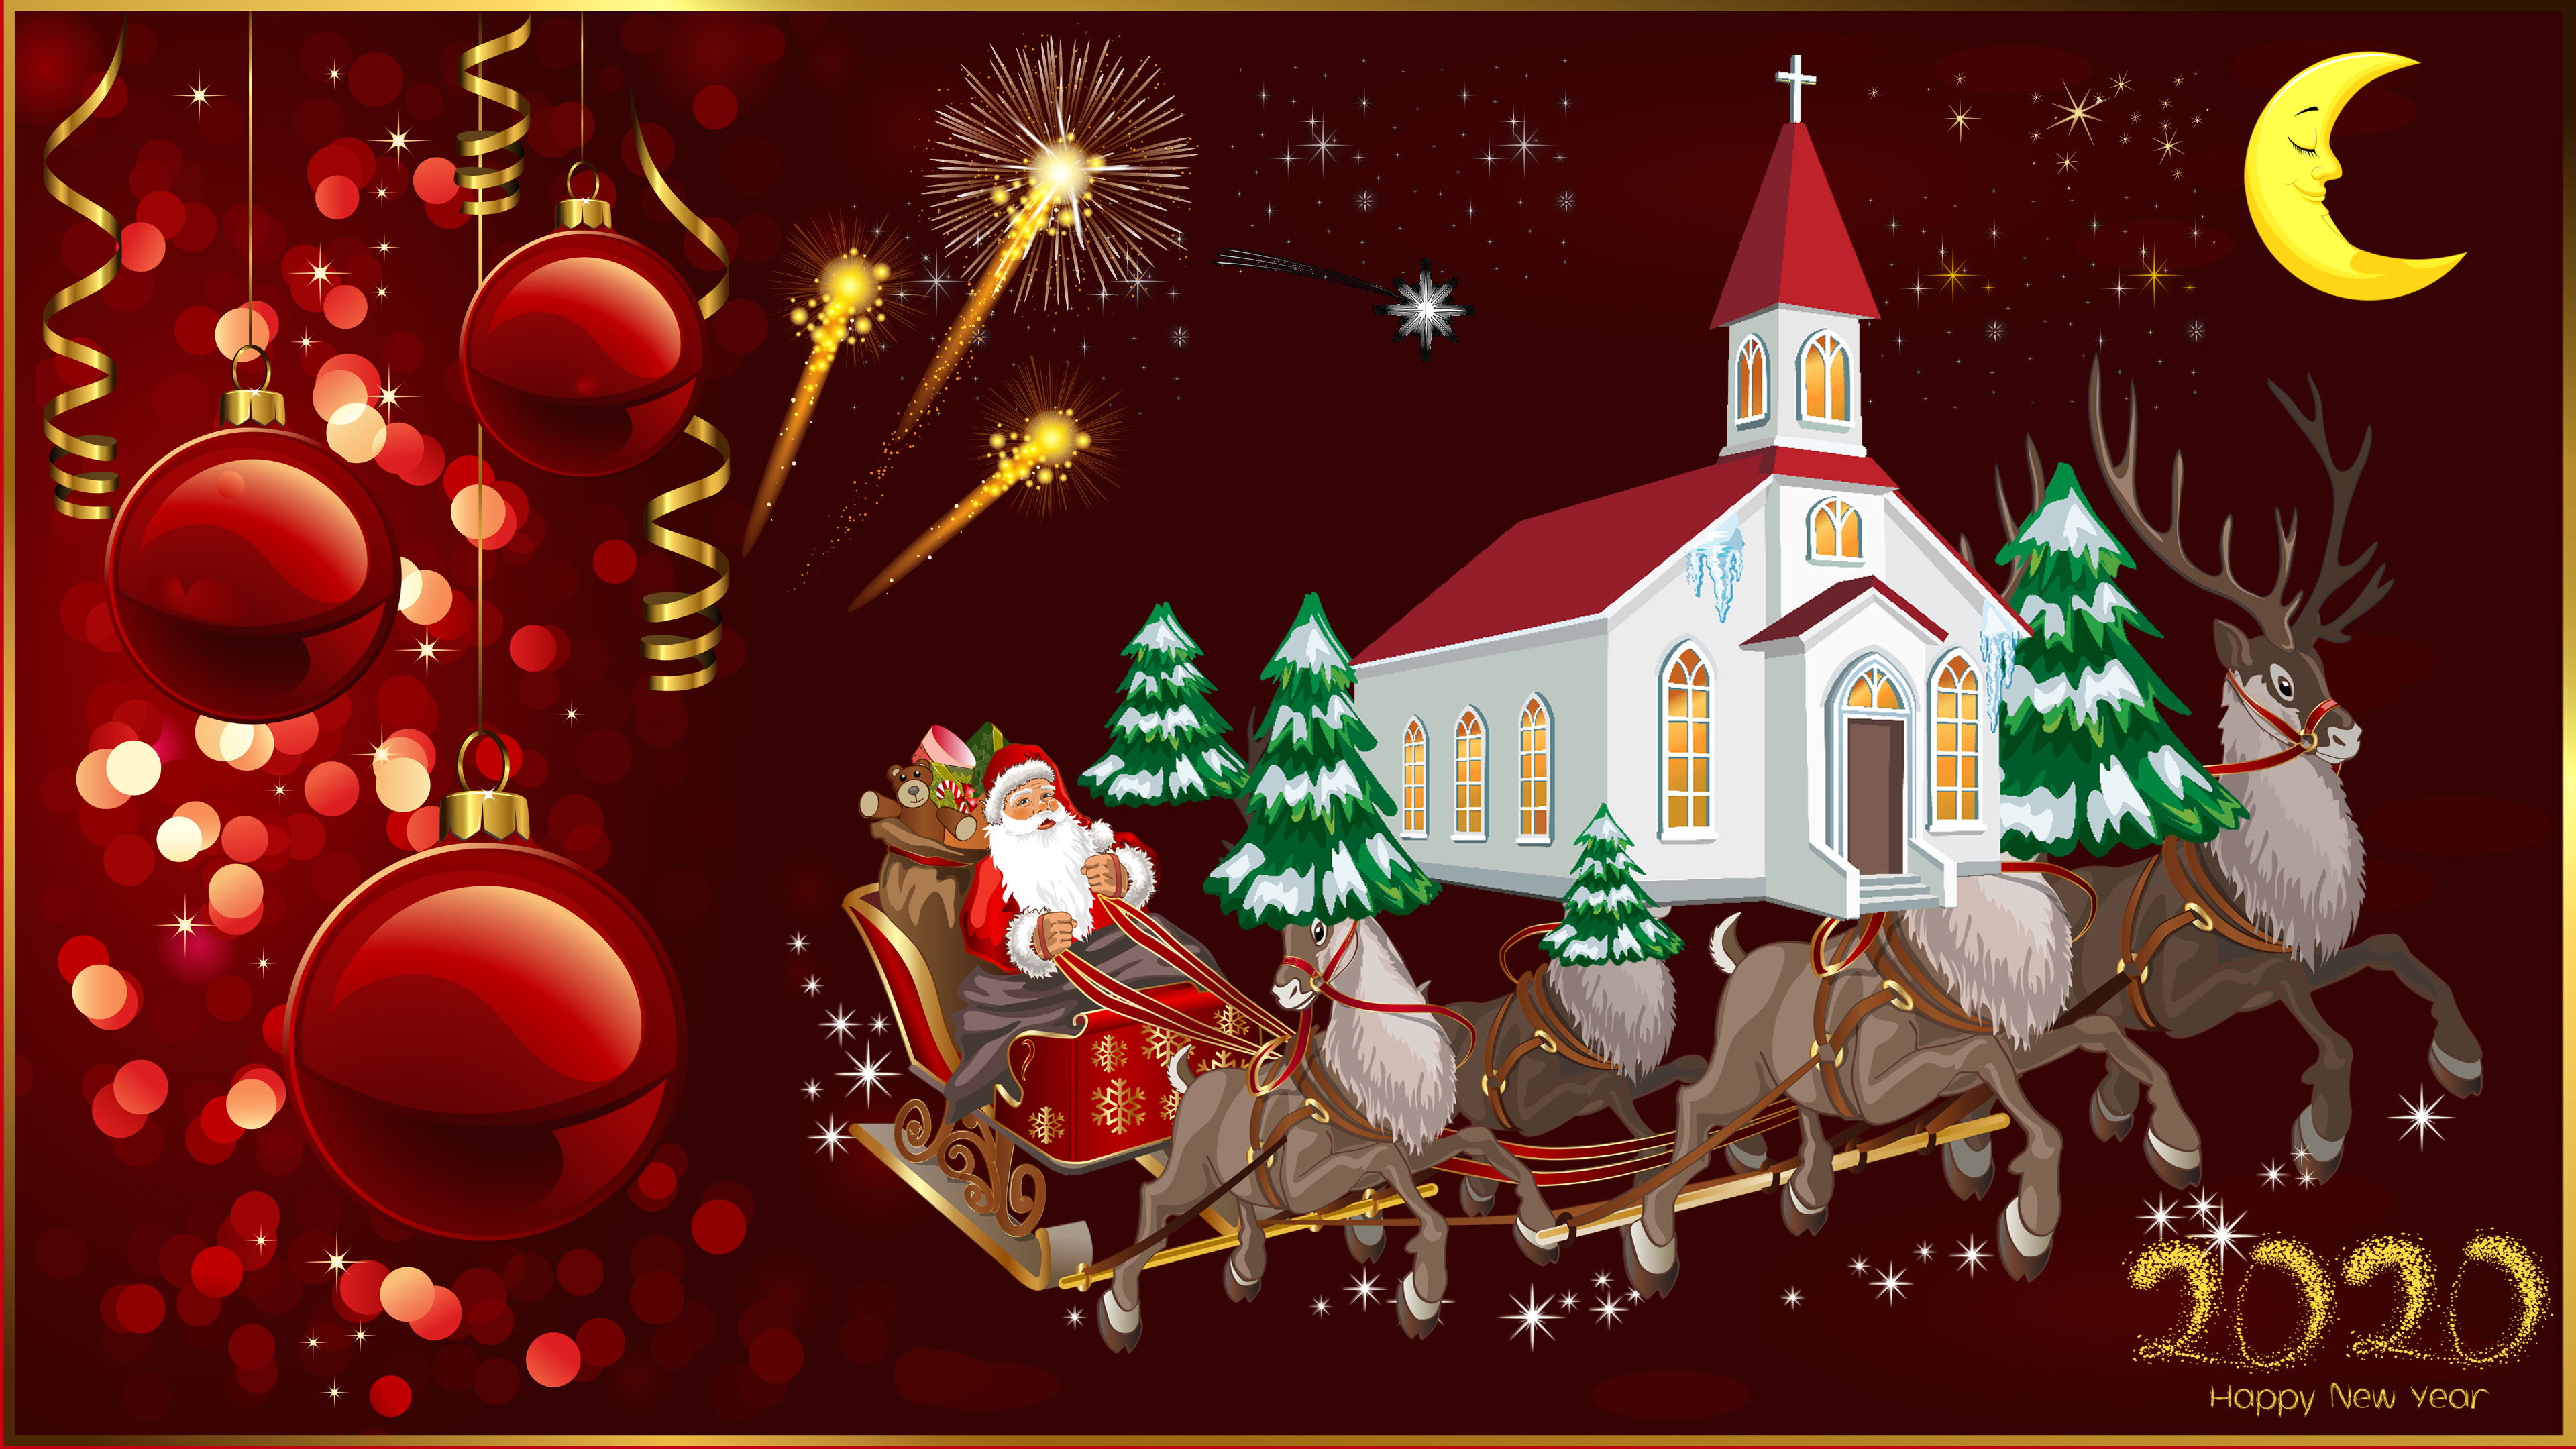 Free download Happy New Year 2020 Merry Christmas Christmas Greeting